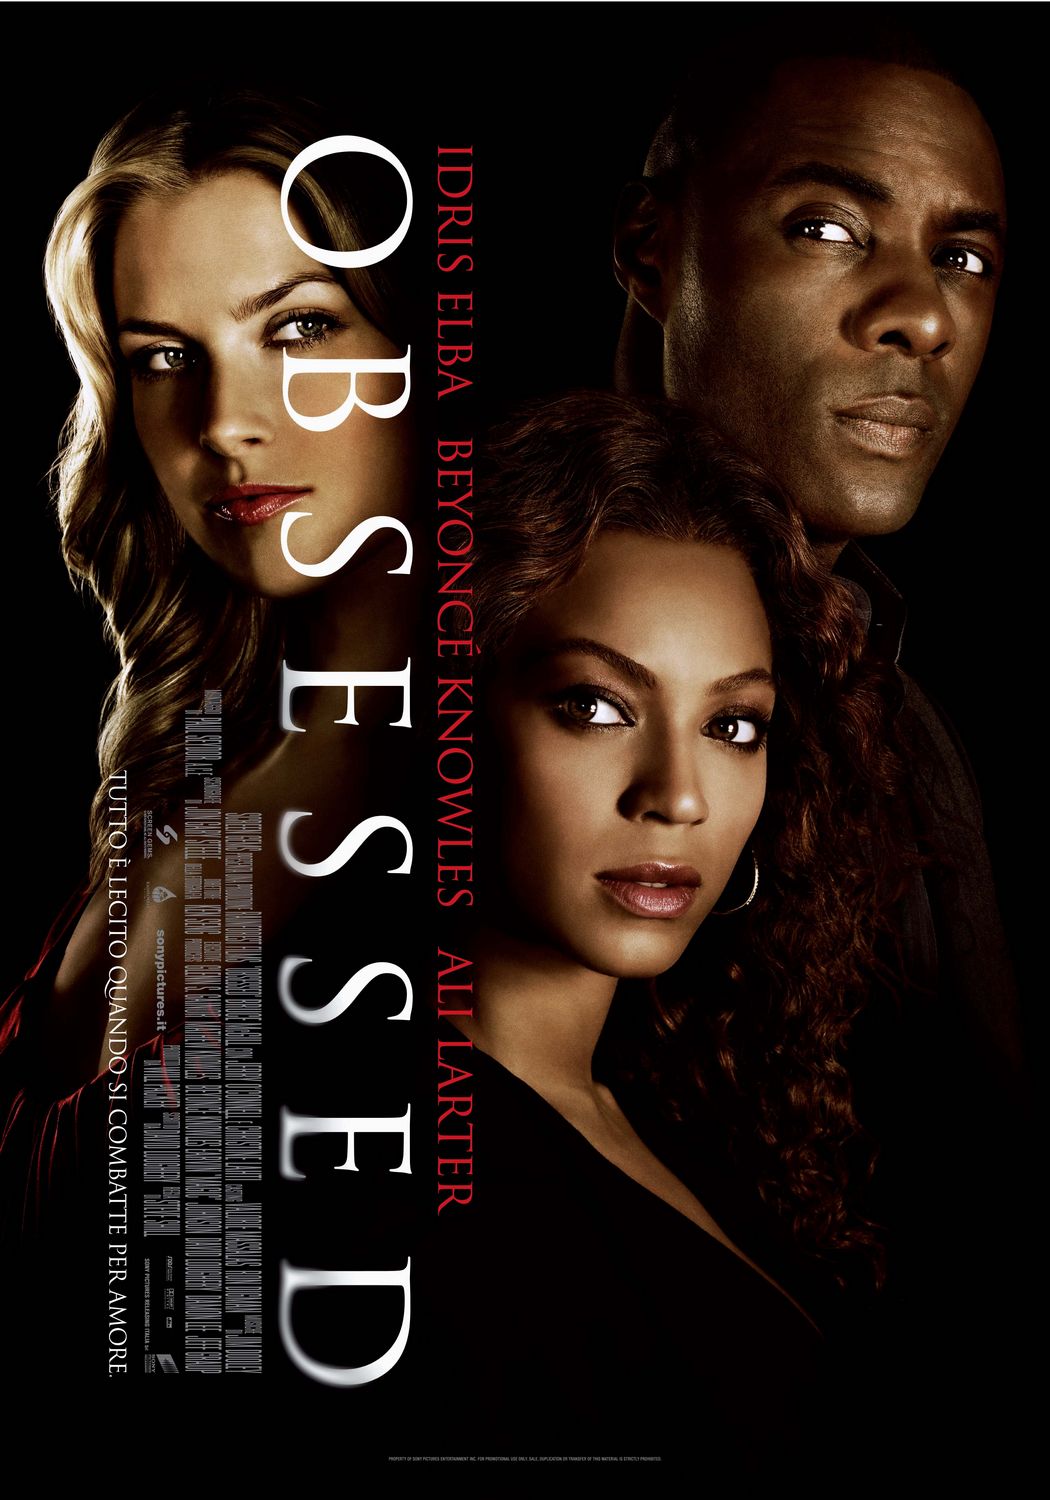 Extra Large Movie Poster Image for Obsessed (#2 of 2)